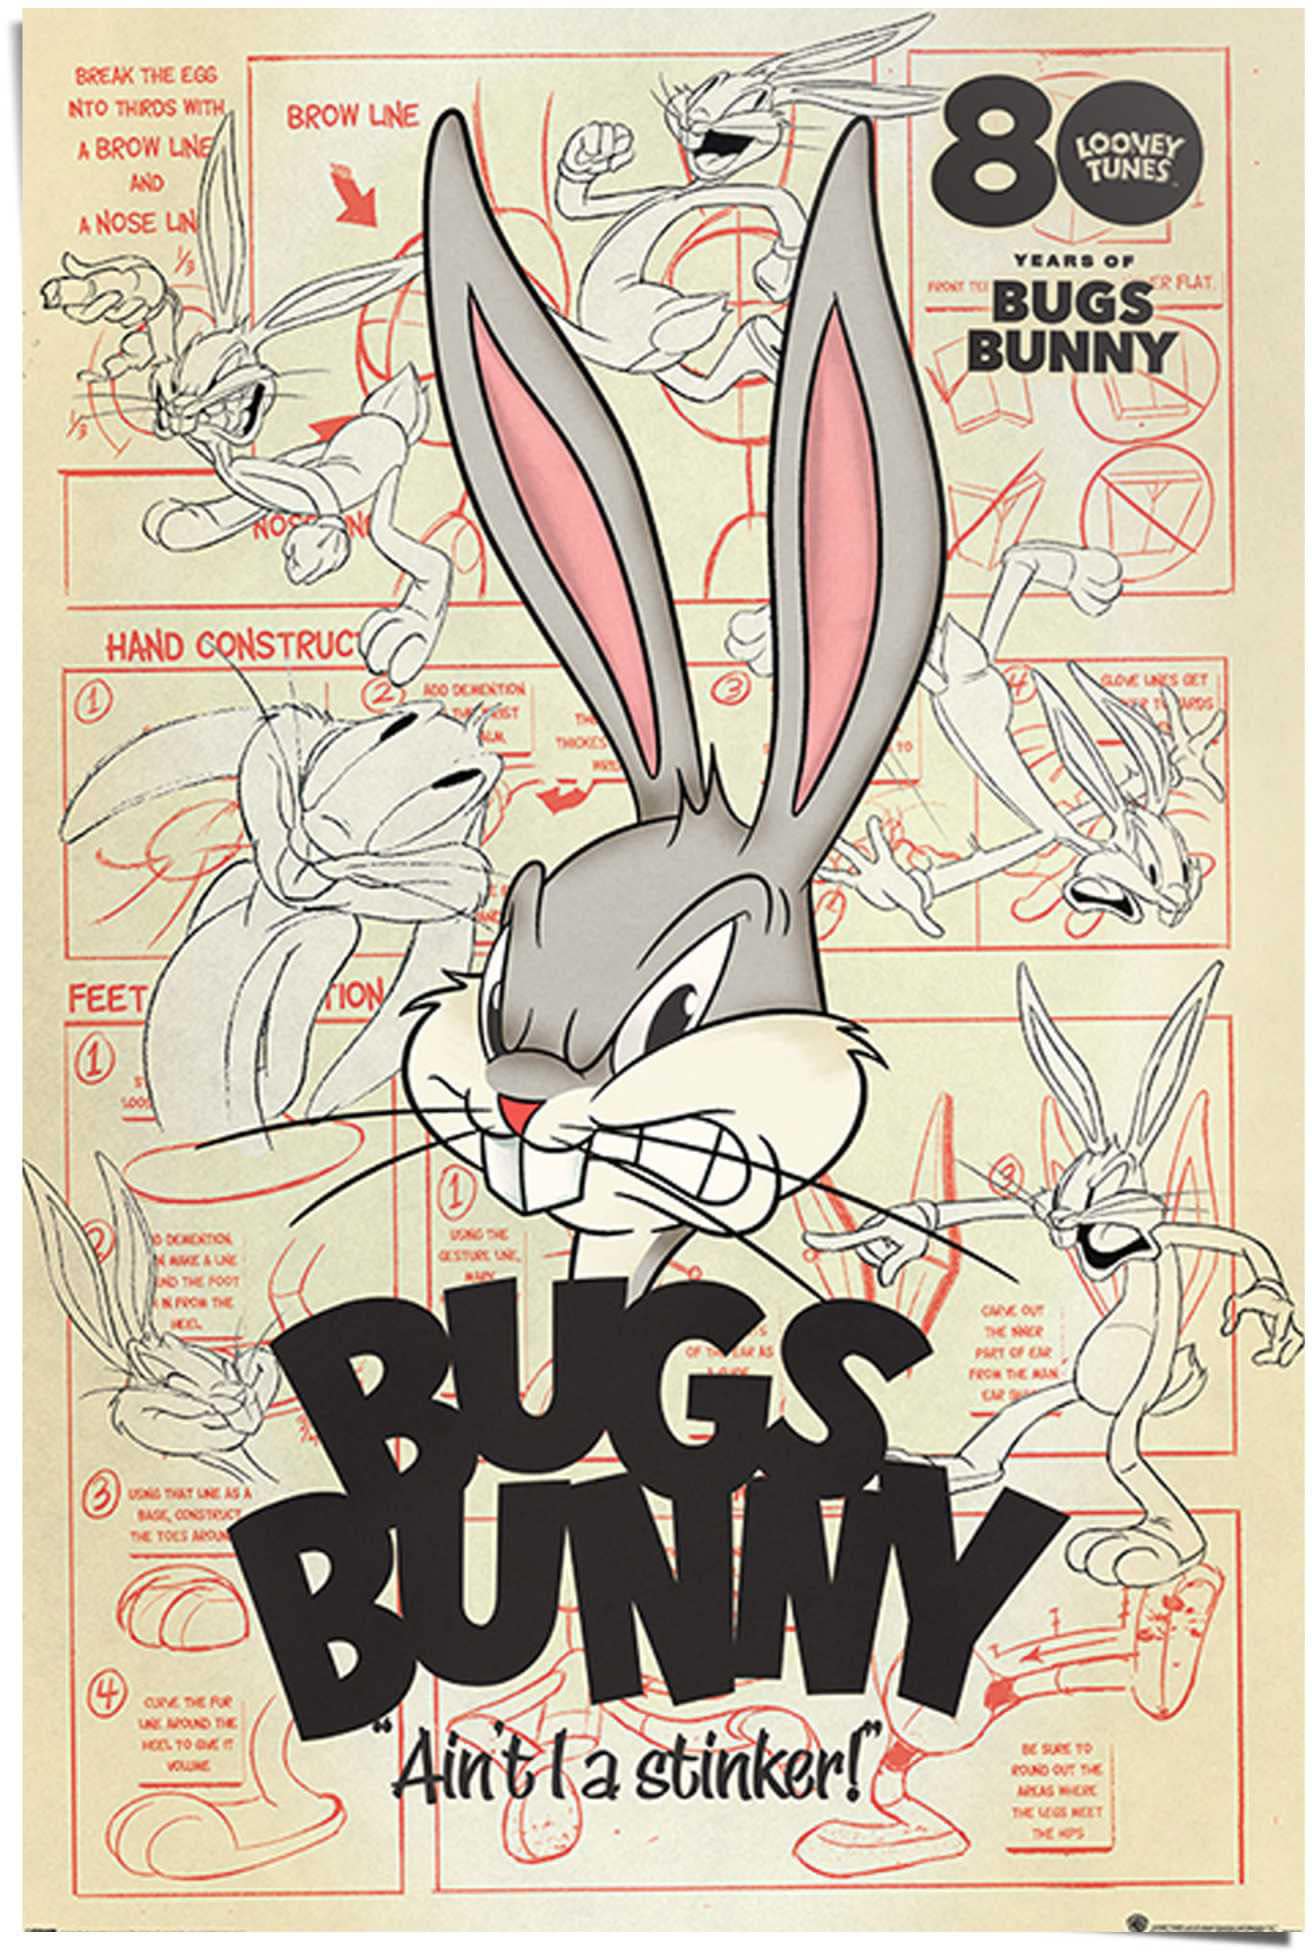 Bros I Looney Reinders! - a Bunny Warner - bequem Tunes ait kaufen stinker St.) Hase«, Poster »Bugs (1